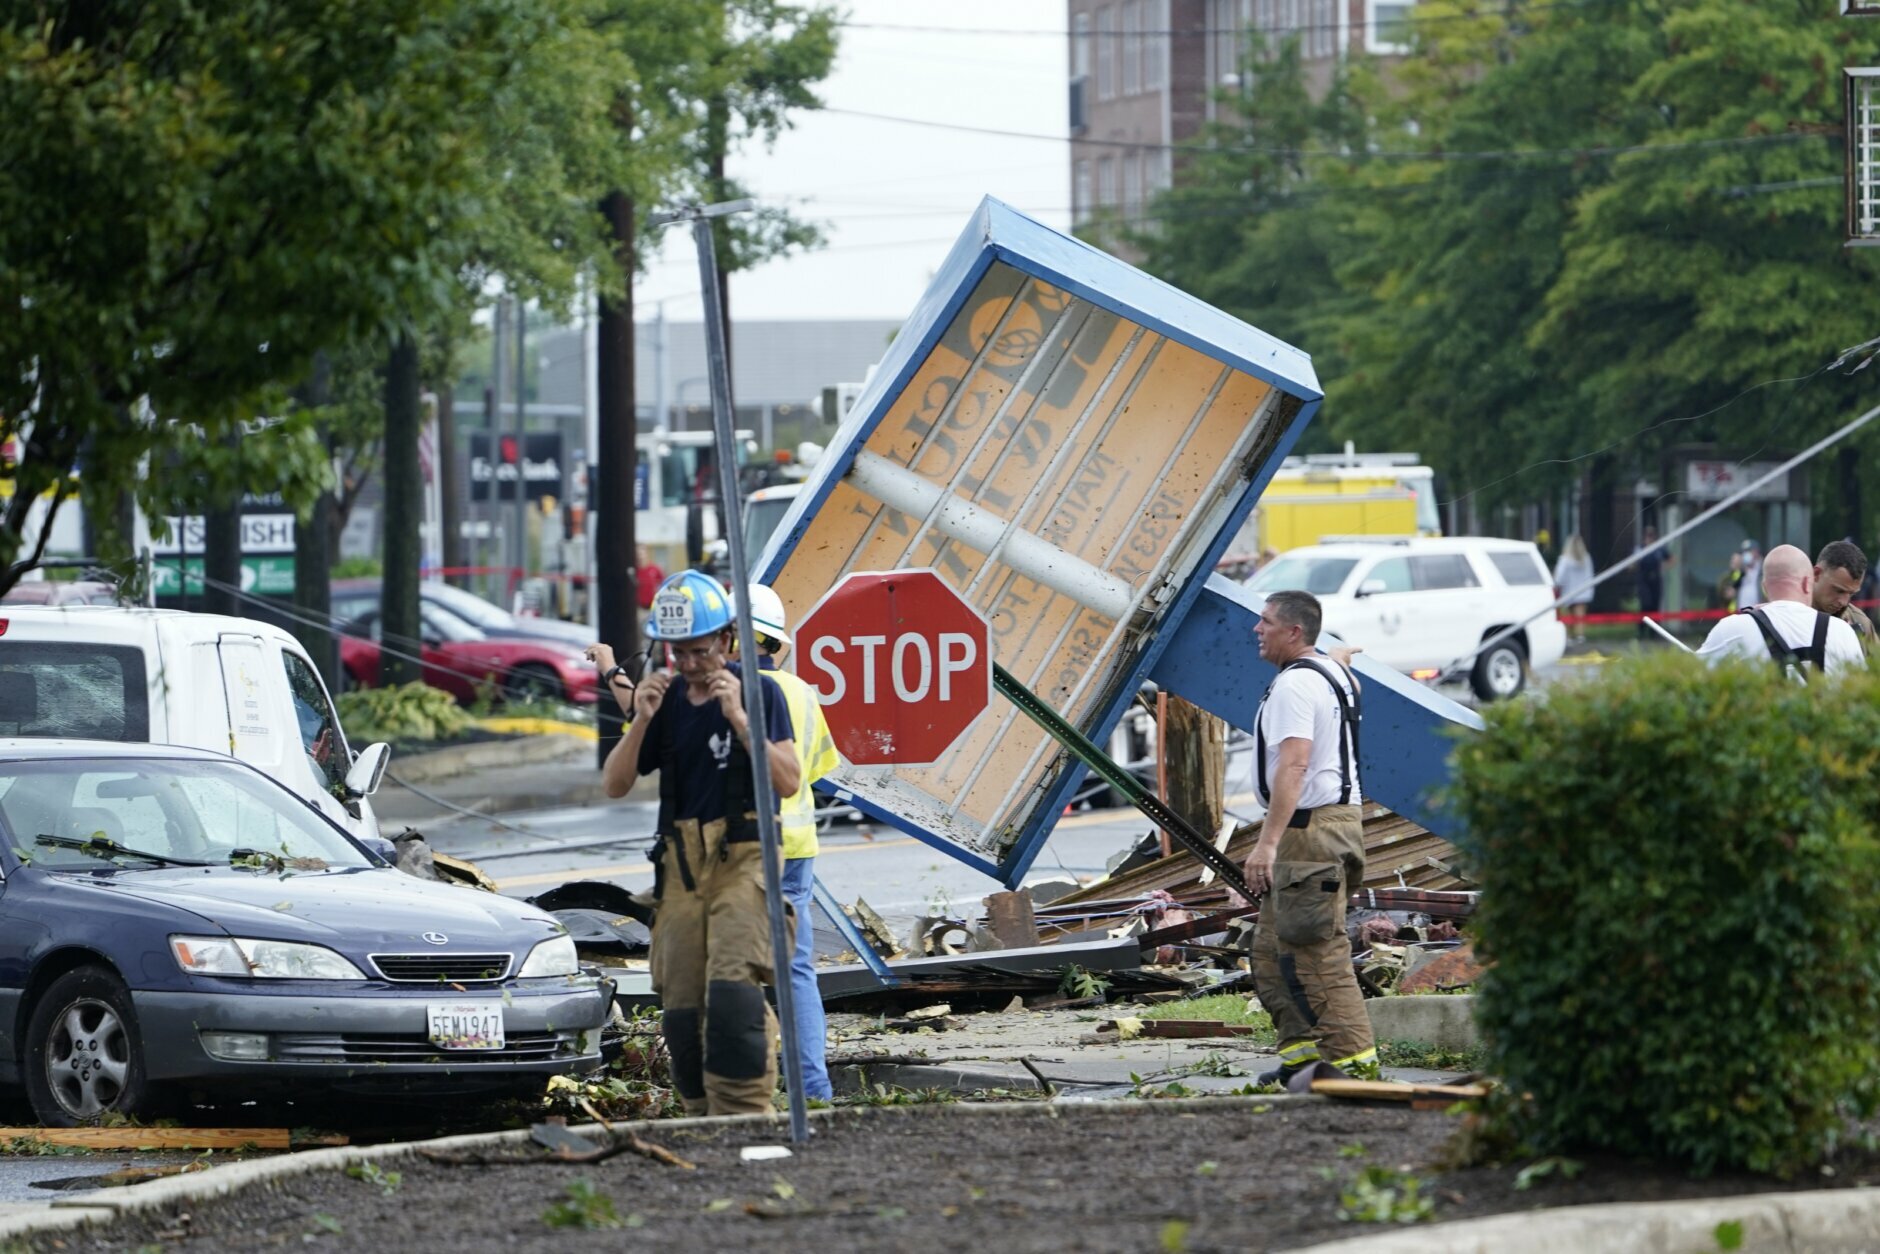 Debris is strewn along West Street in Annapolis, Md., Wednesday, Sept. 1, 2021, after severe weather moved through the area. (AP Photo/Susan Walsh)